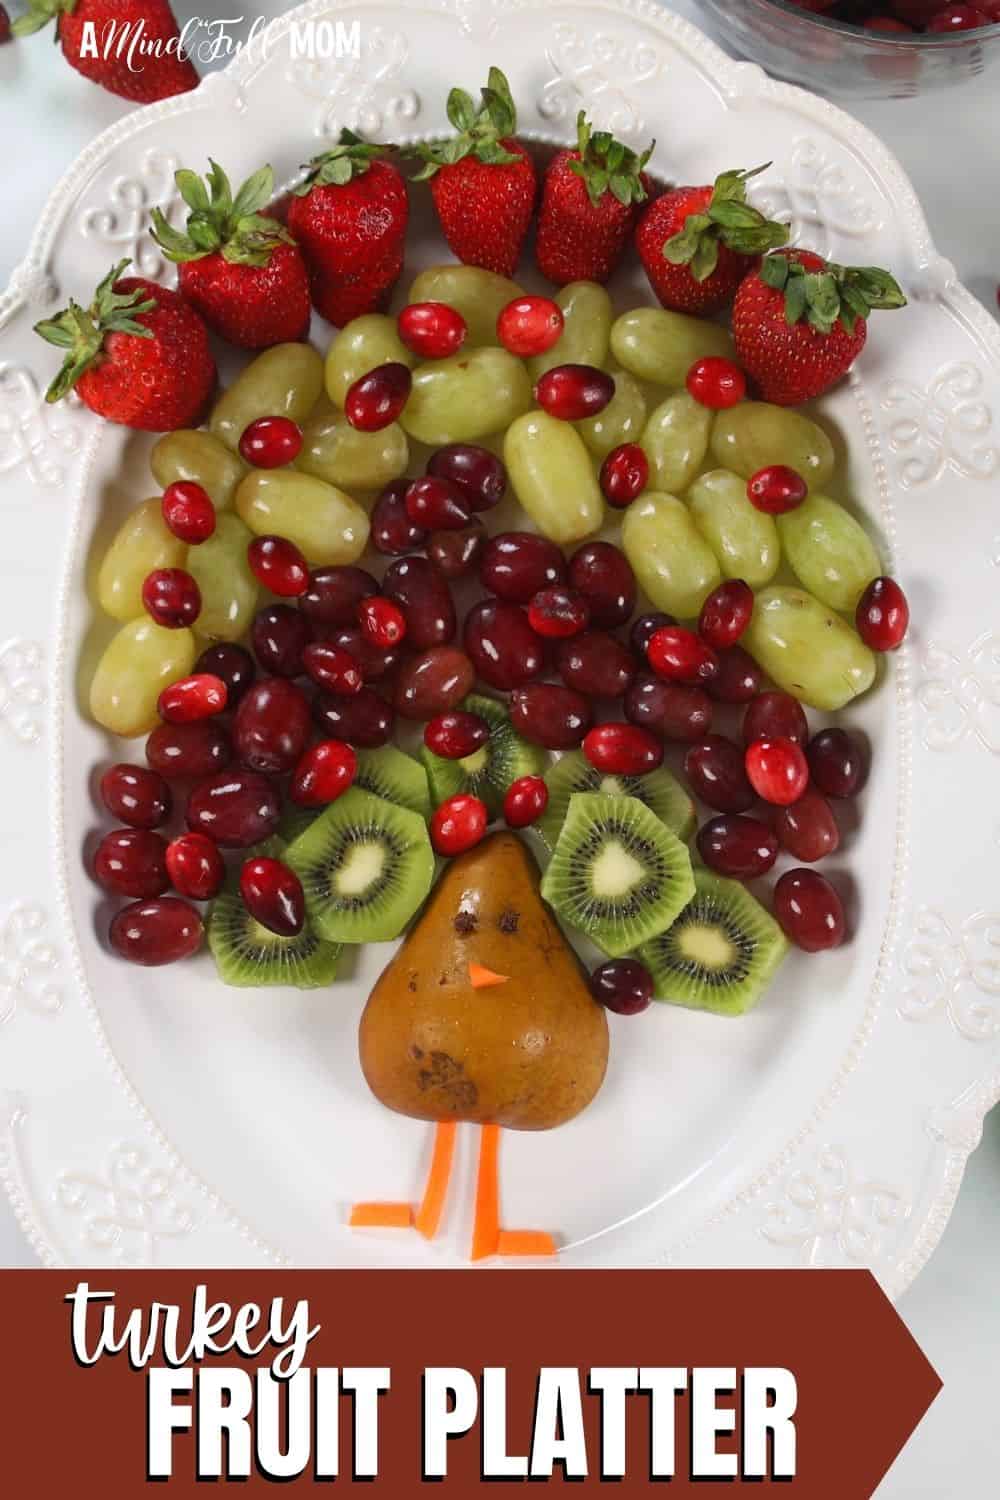 Make an adorable Fruit Turkey using a variety of fresh fruit! This Turkey Fruit Platter makes a perfect healthy appetizer or snack tray for Thanksgiving gatherings. 